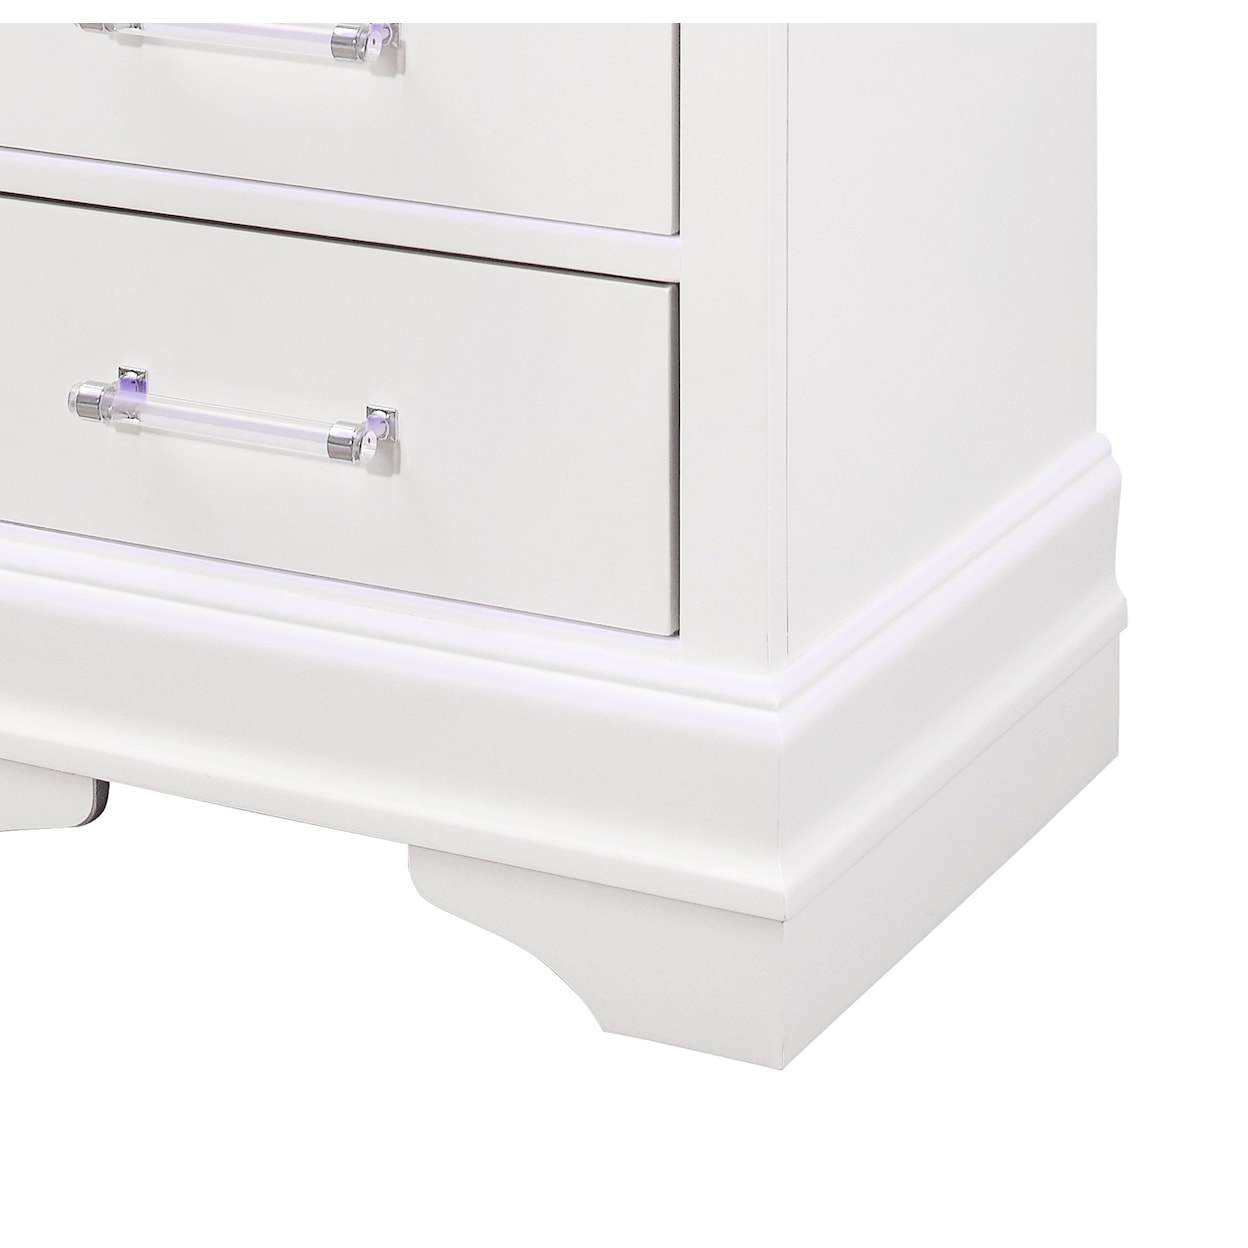 Global Furniture Light Up Louie LIGHT UP LOUIE WHITE NIGHTSTAND |